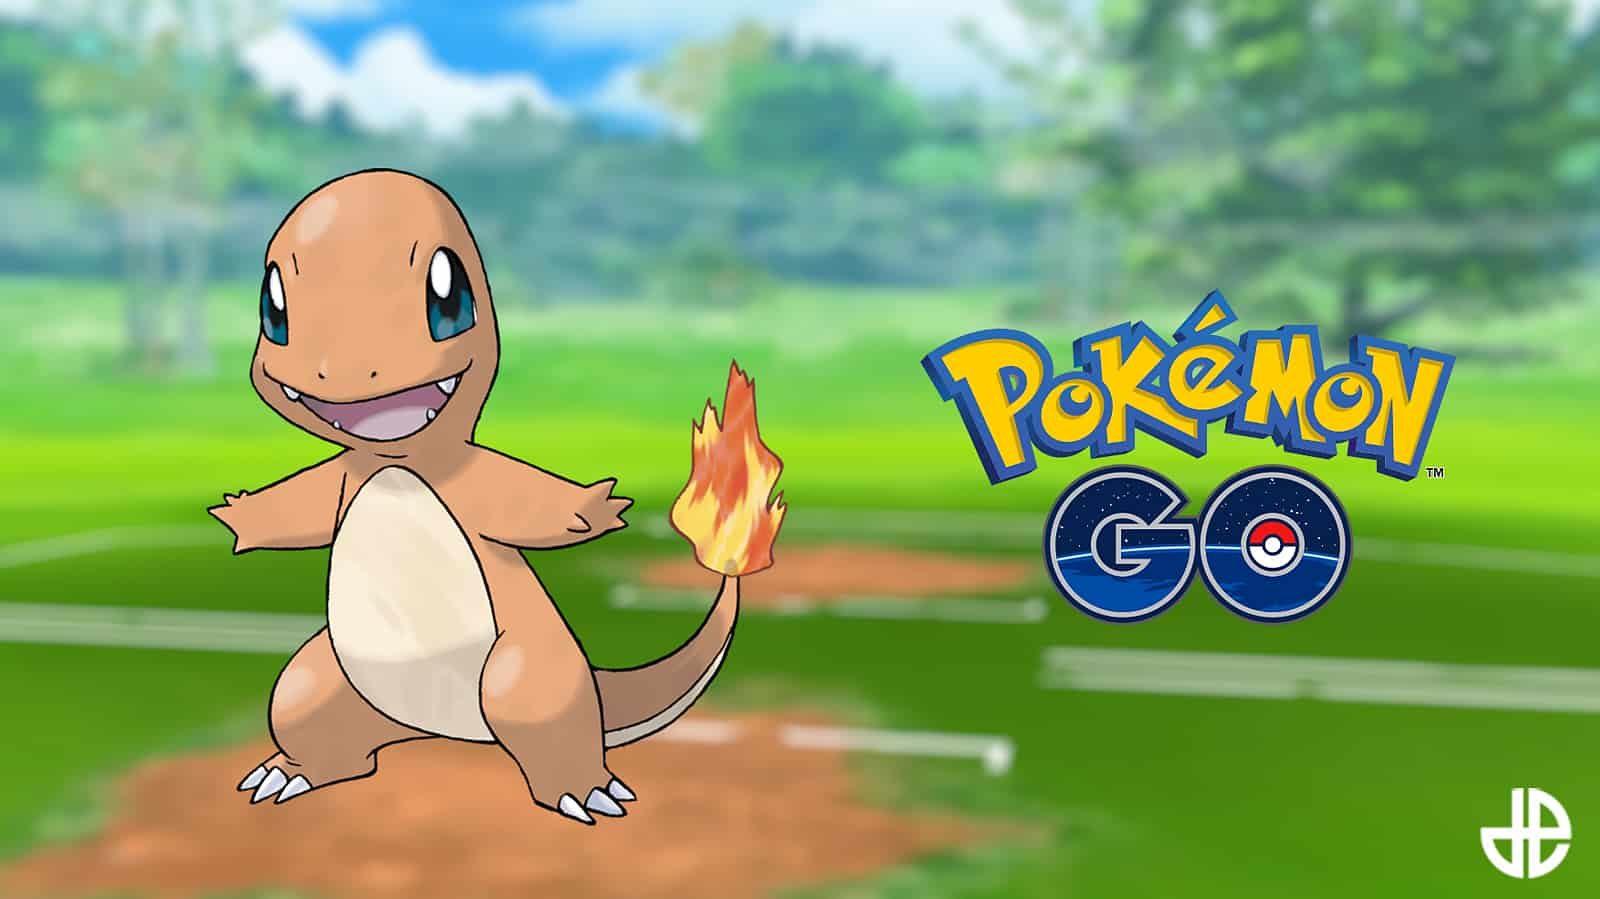 An image of Charmander from the anime on a Pokemon Go background with the logo